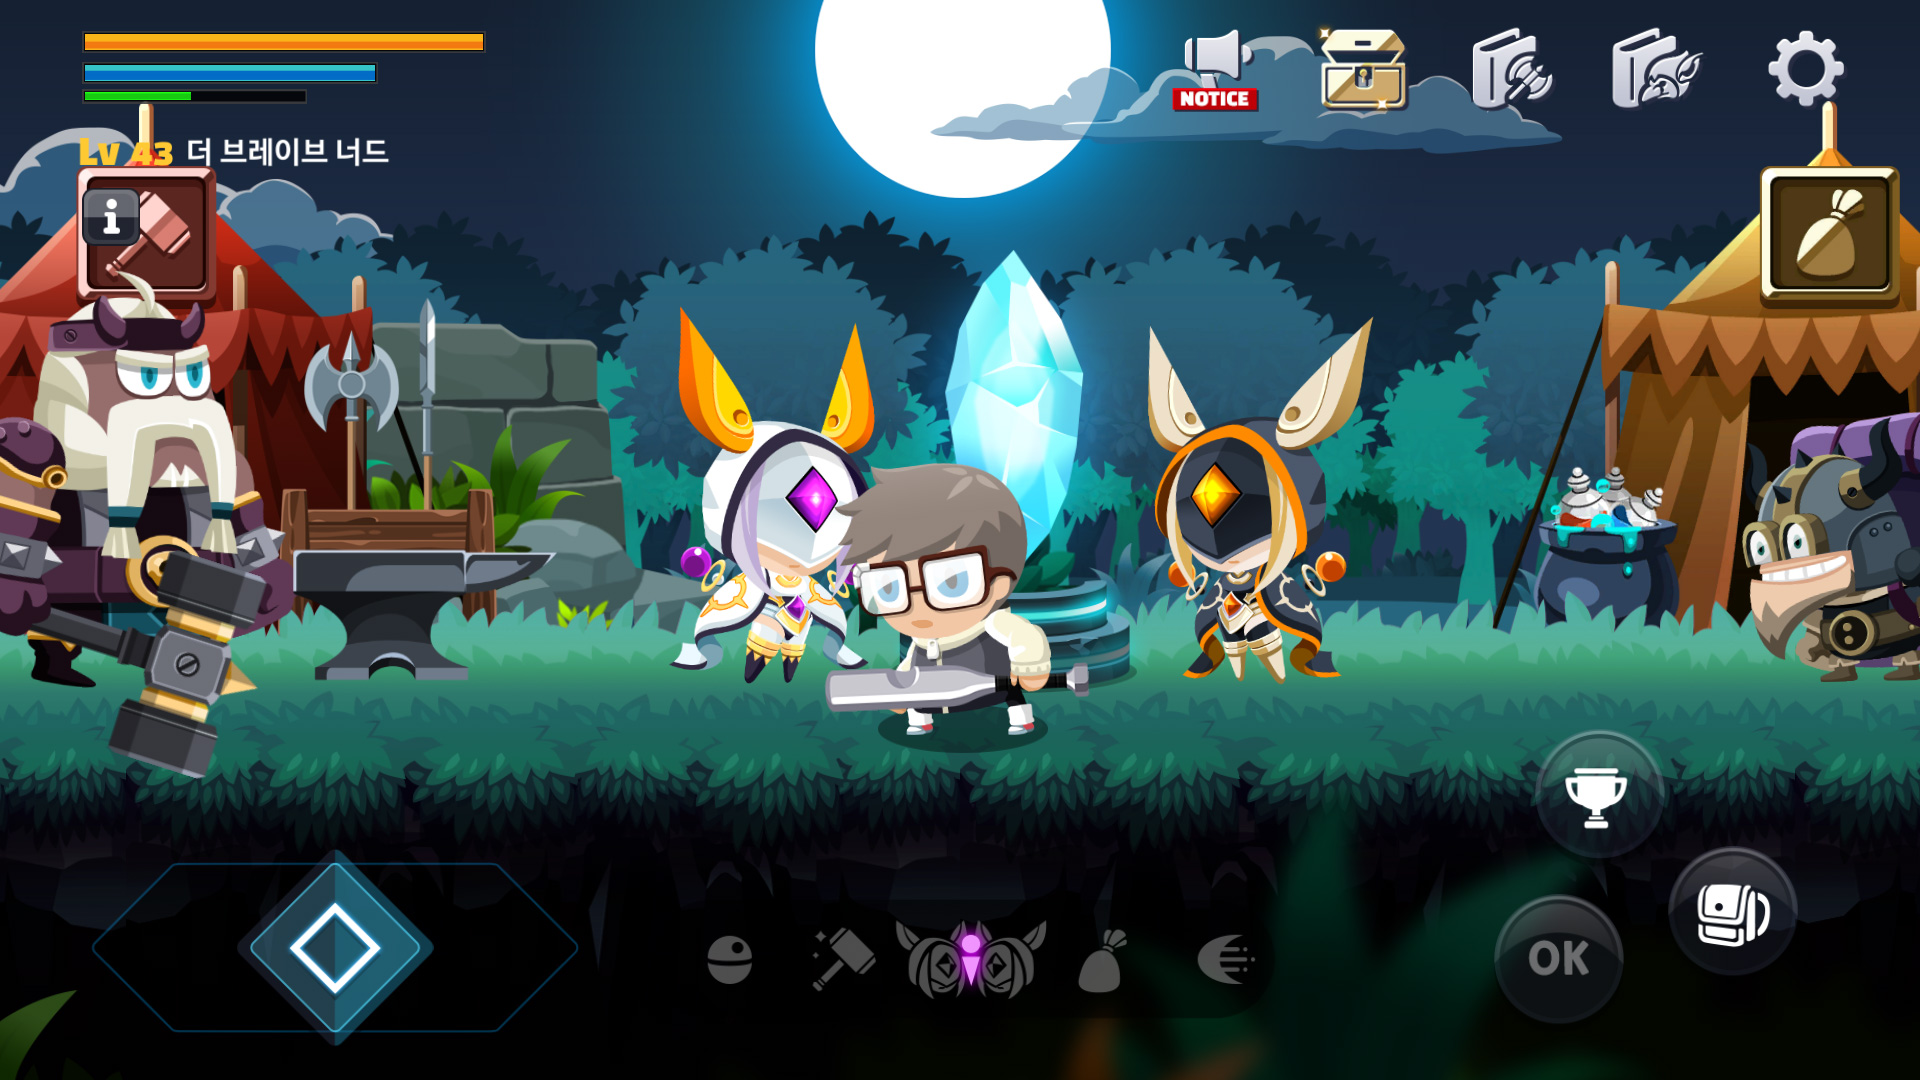 Gameplay of the The Brave Nerd for Android phone or tablet.